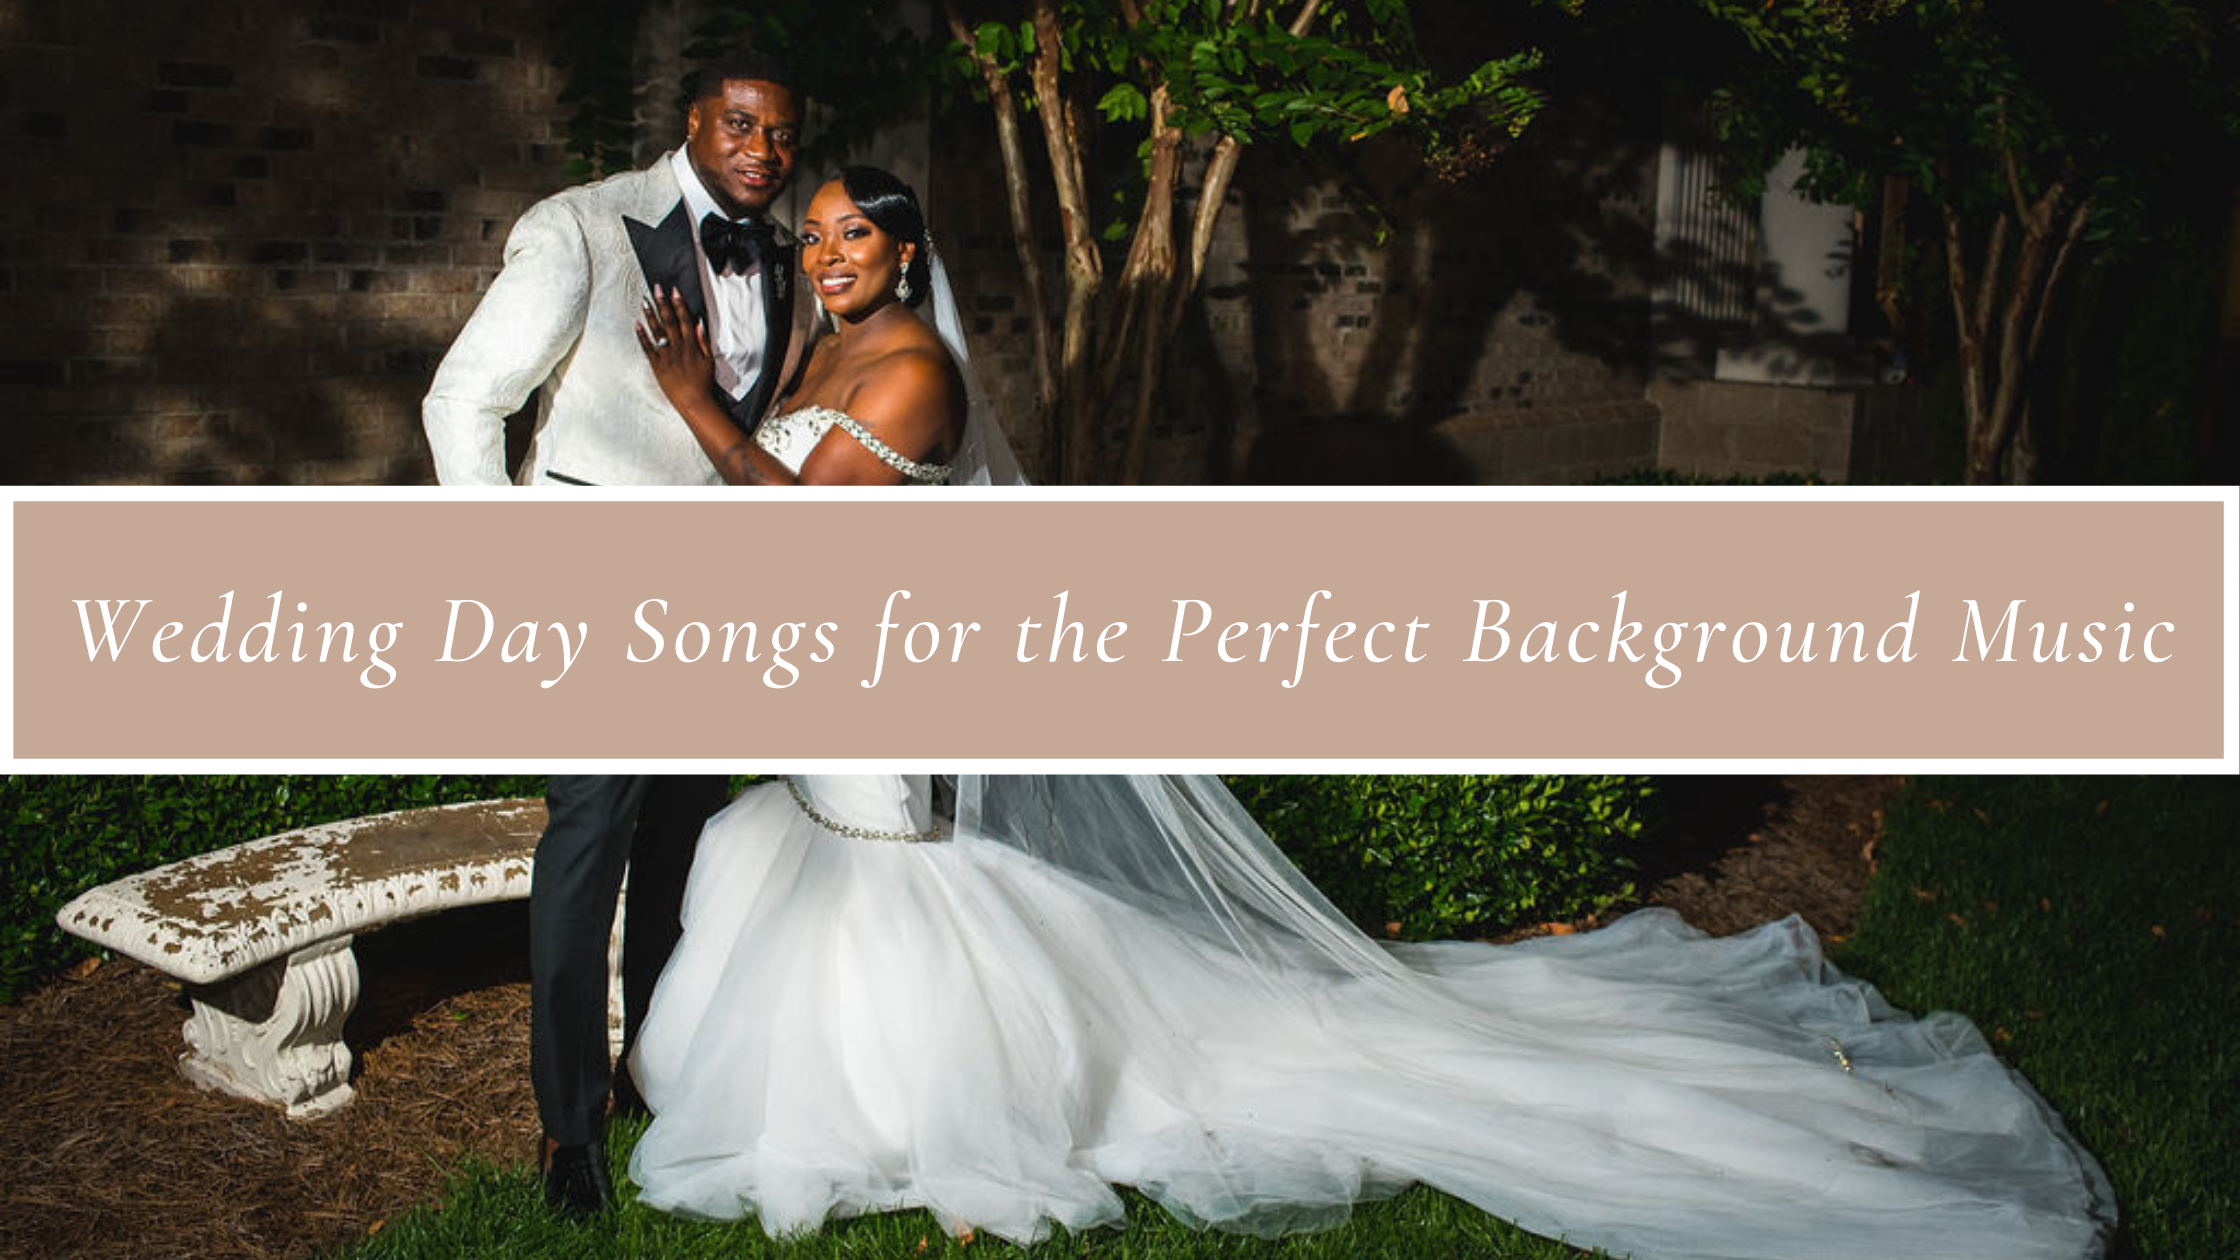 Wedding Day Songs for the Perfect Background Music